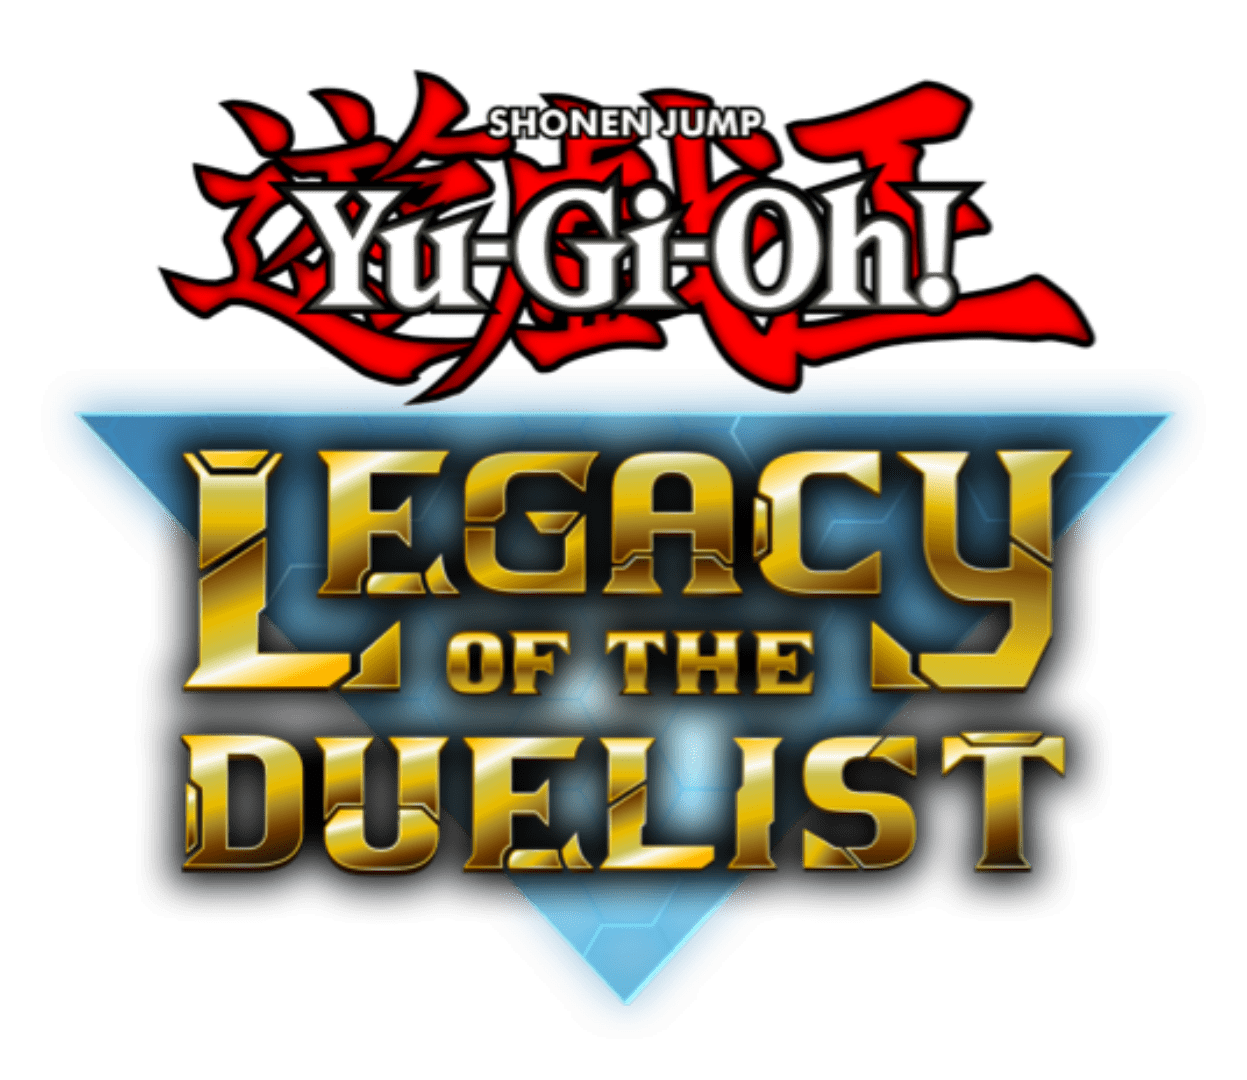 Yu-Gi-Oh! Comes to Xbox One and PS4